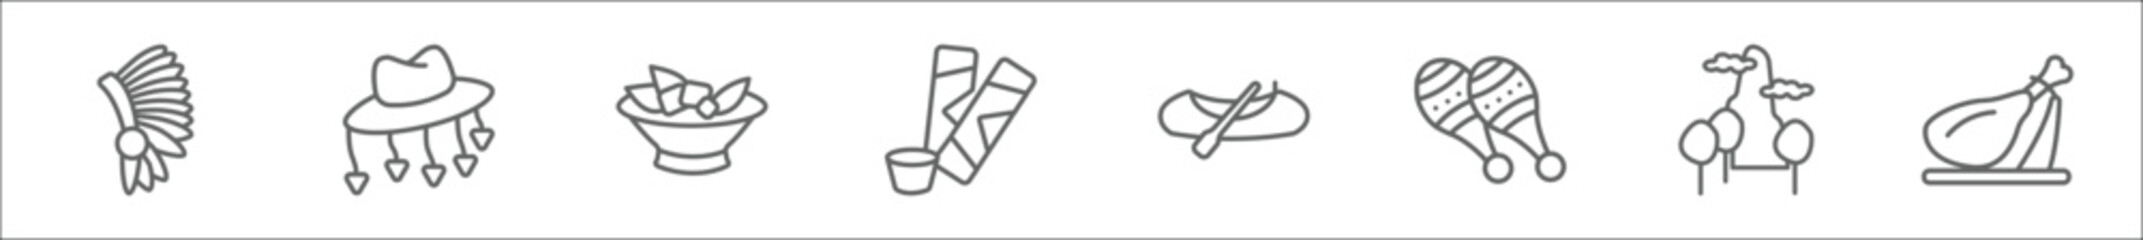 outline set of culture line icons. linear vector icons such as indian headdress, cork hat, gazpacho, spring rolls, native american canoe, maracas couple, pico cao, jamon serrano